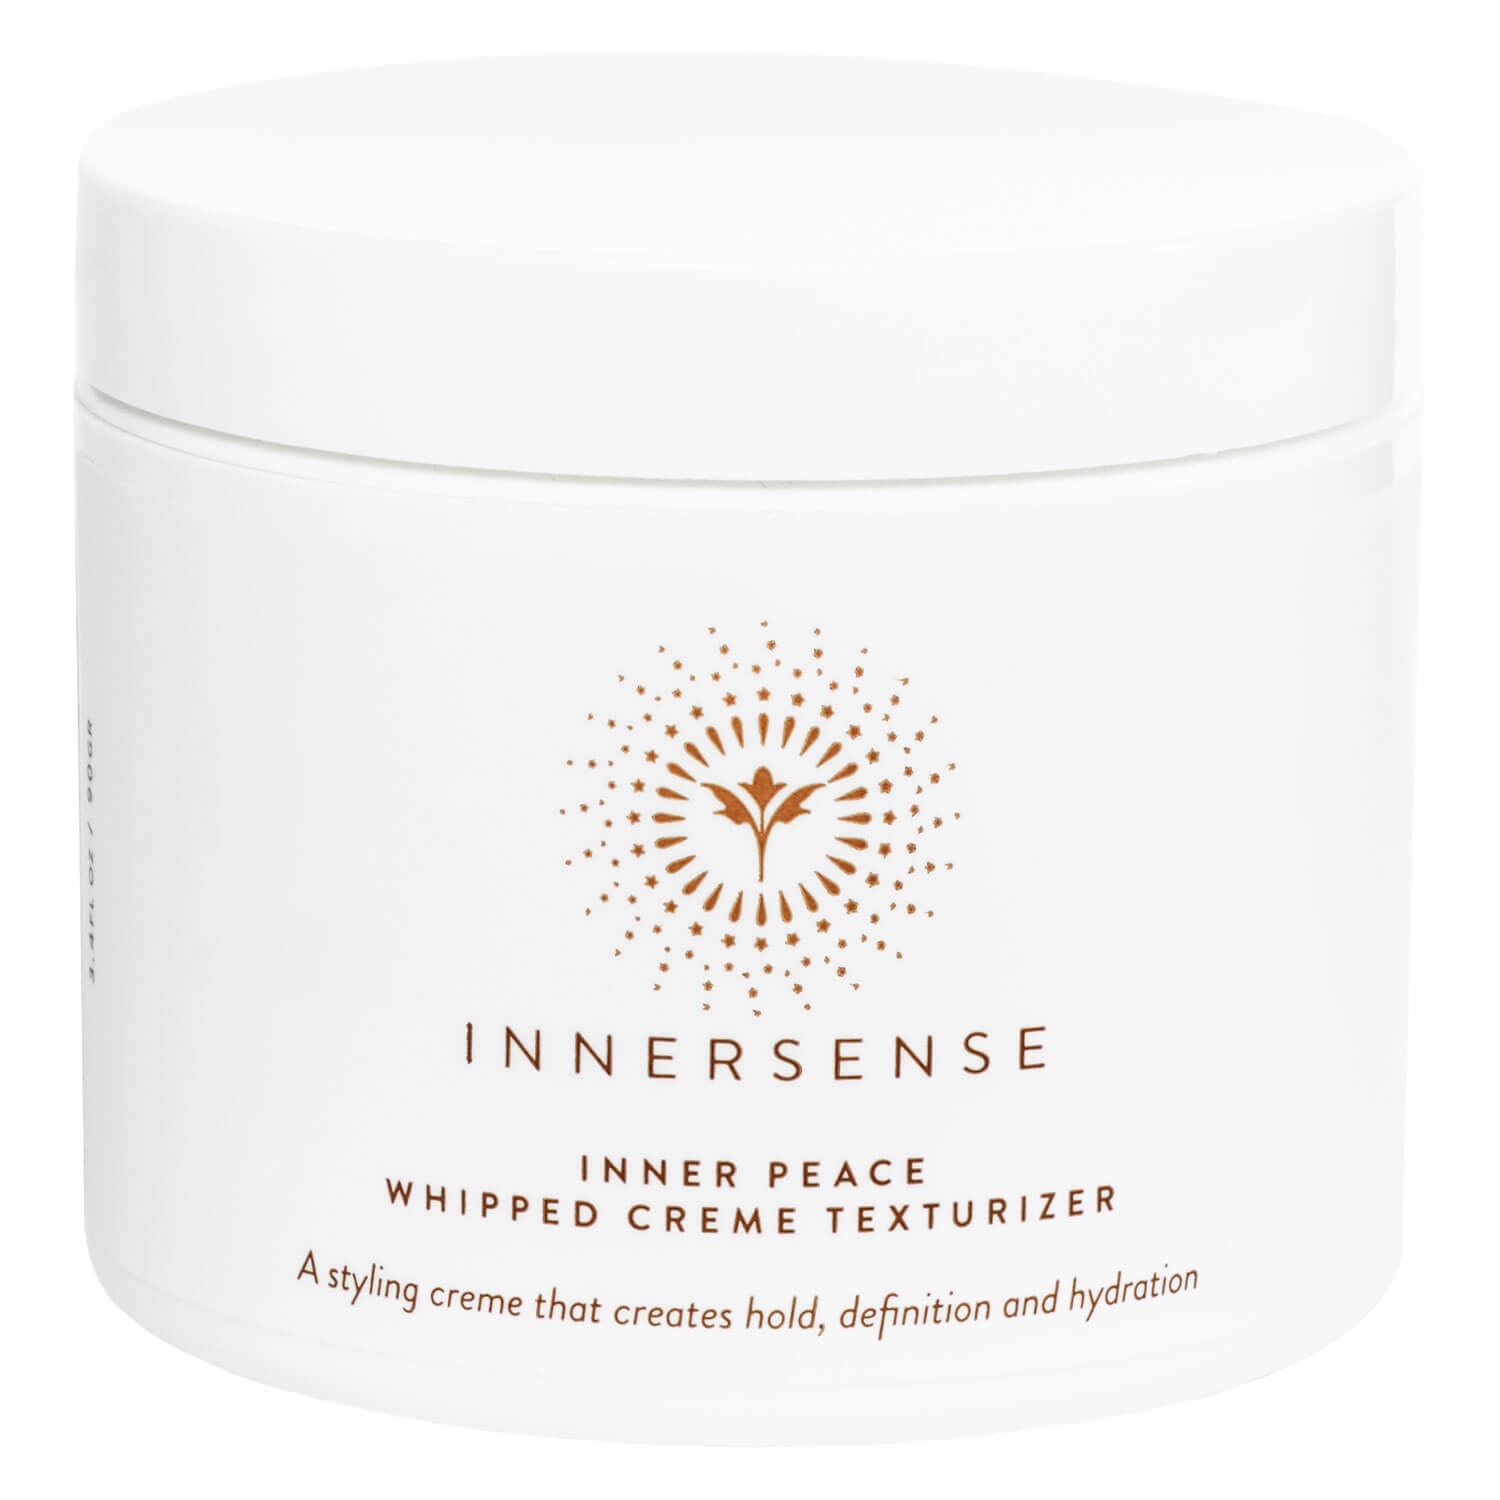 Product image from Innersense - Inner Peace/Whipped Cream Texturizer